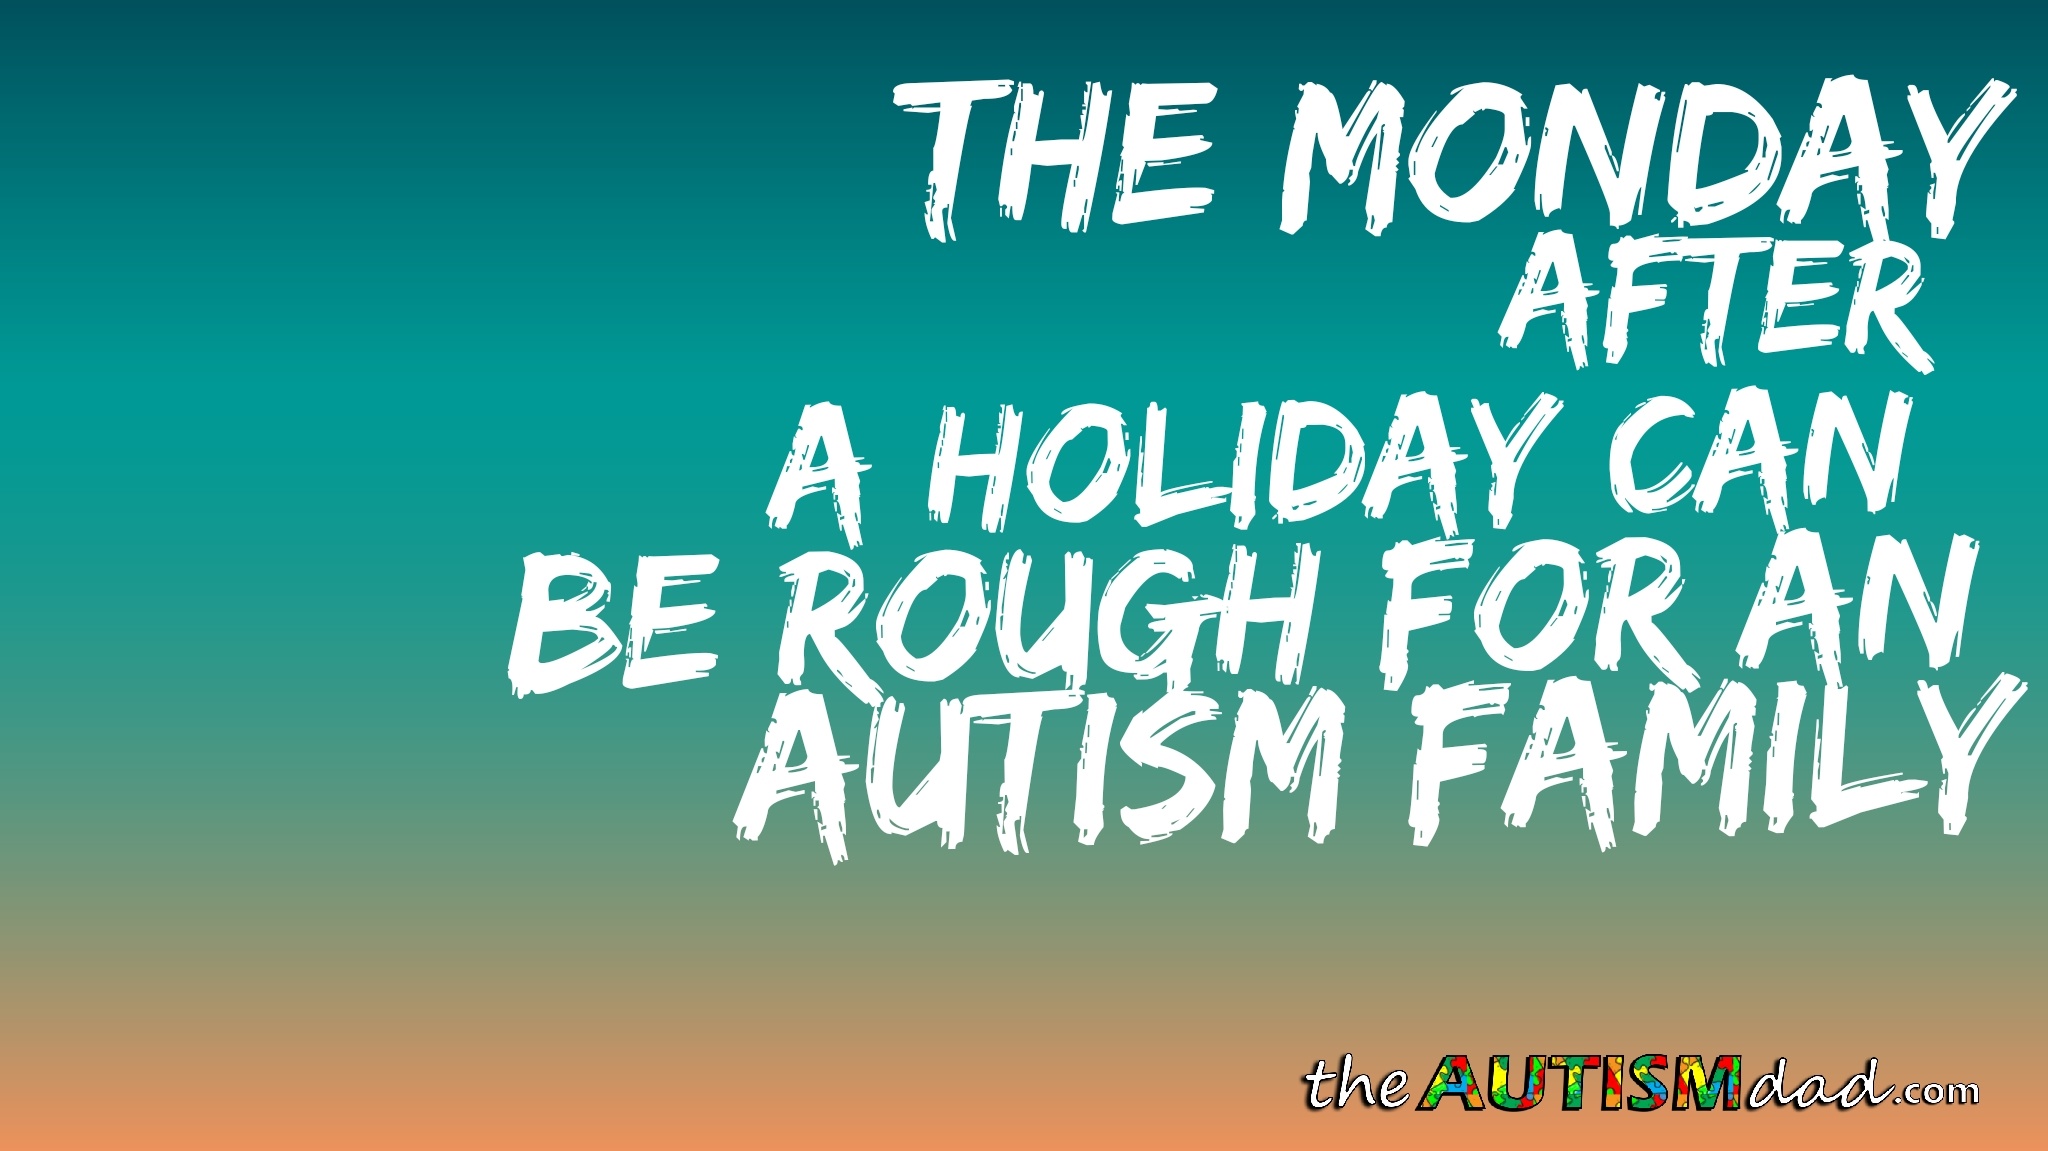 Read more about the article The Monday after a holiday can be rough for an #Autism